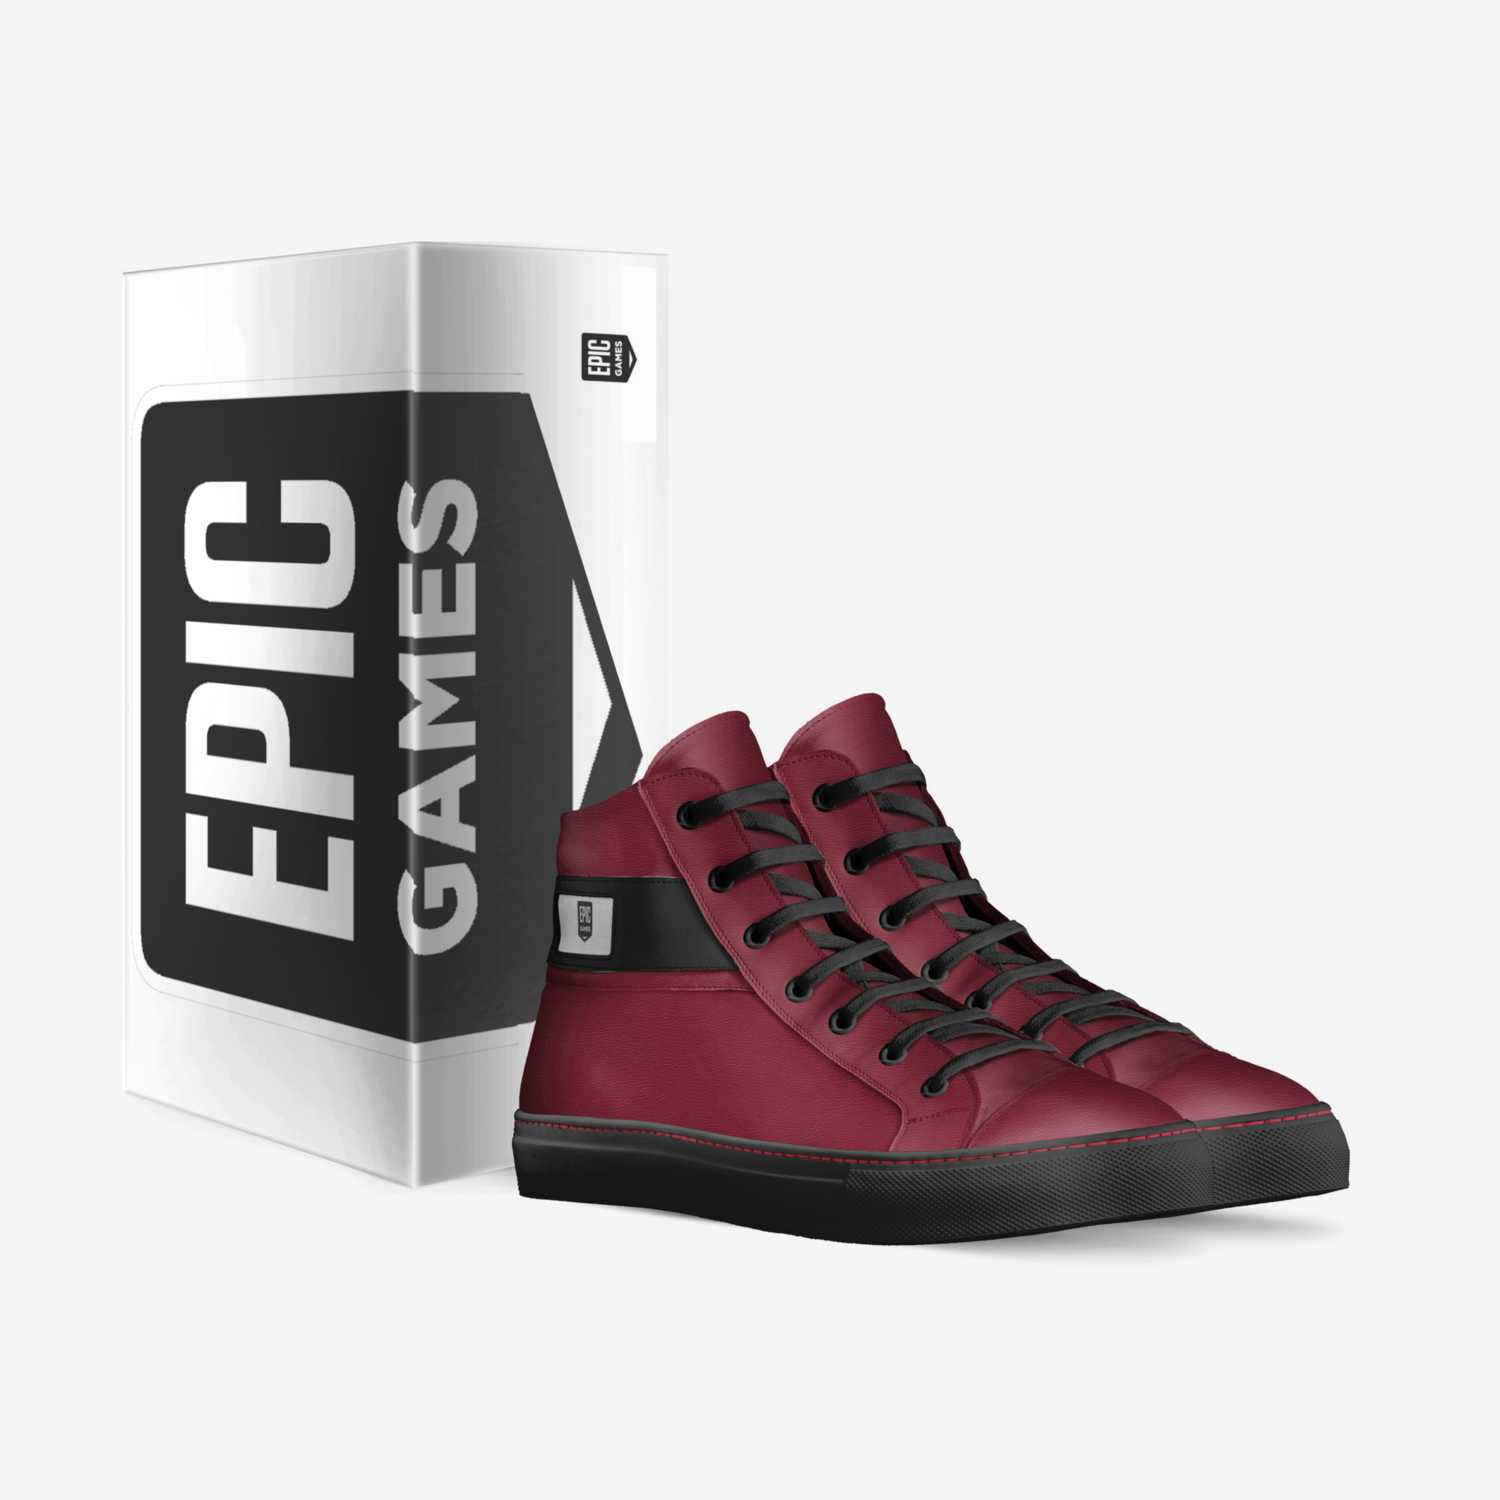 Epicsshoe custom made in Italy shoes by Anton | Box view